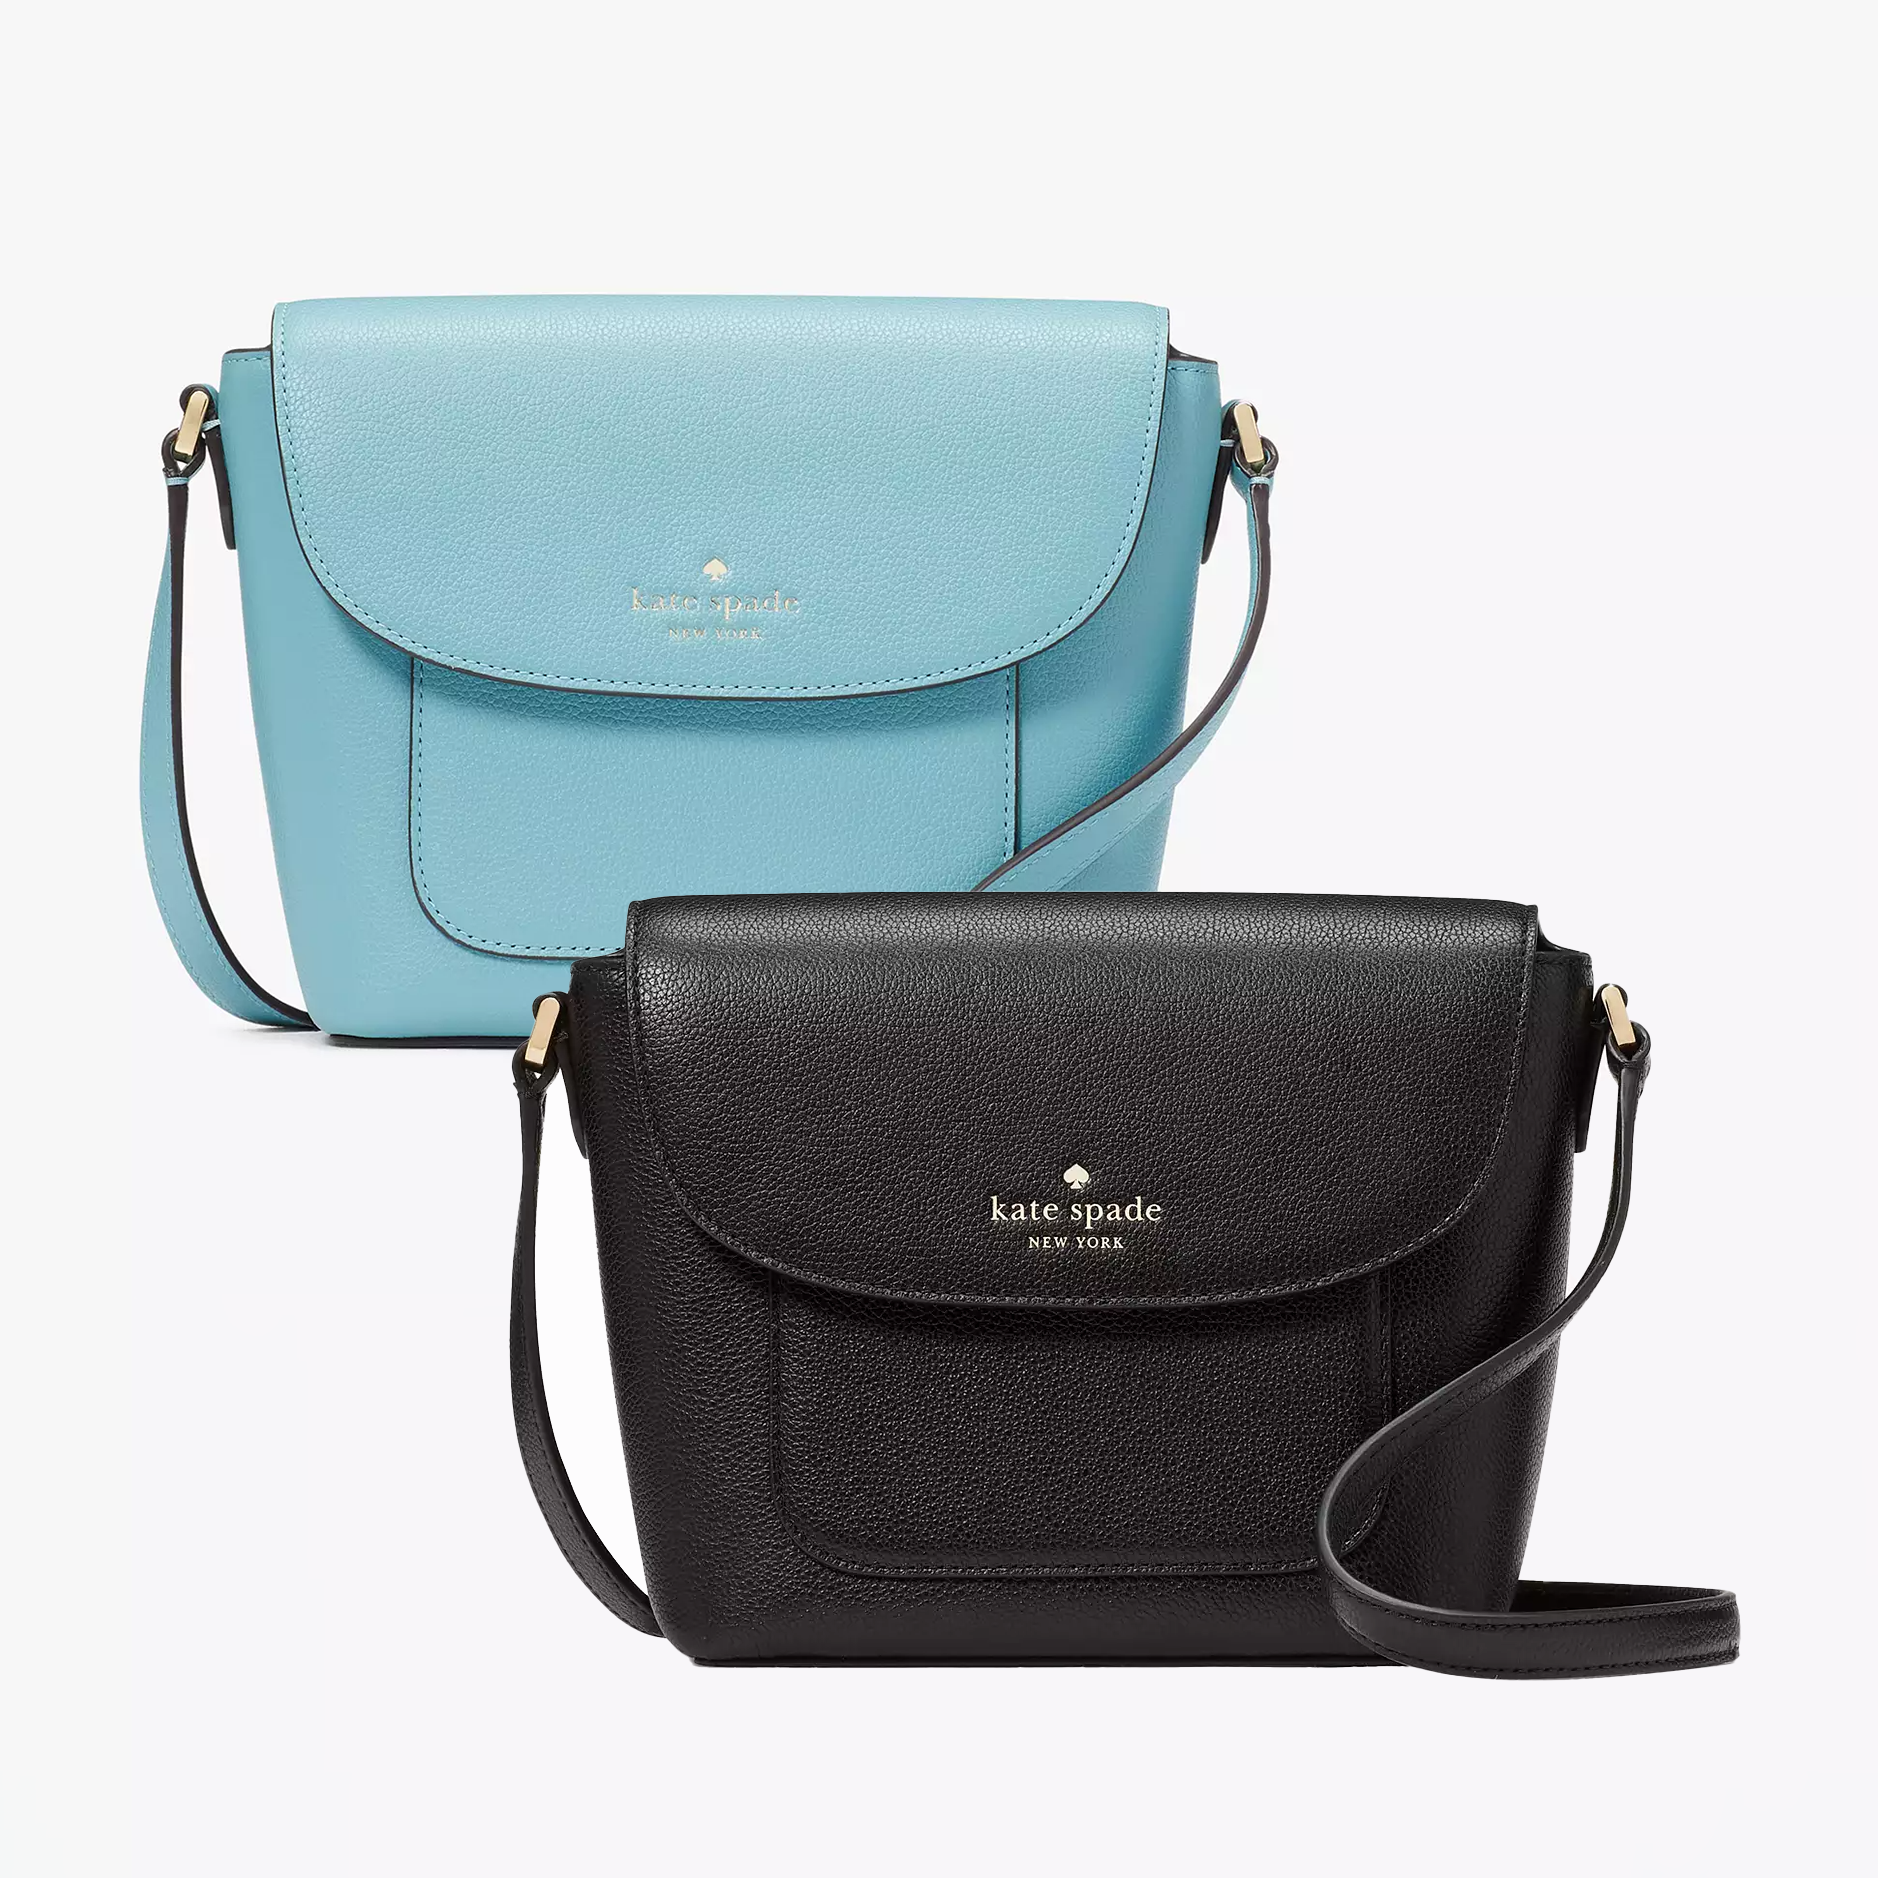 Two crossbody bags, one in black and one in light blue, both with a flap closure and adjustable straps.